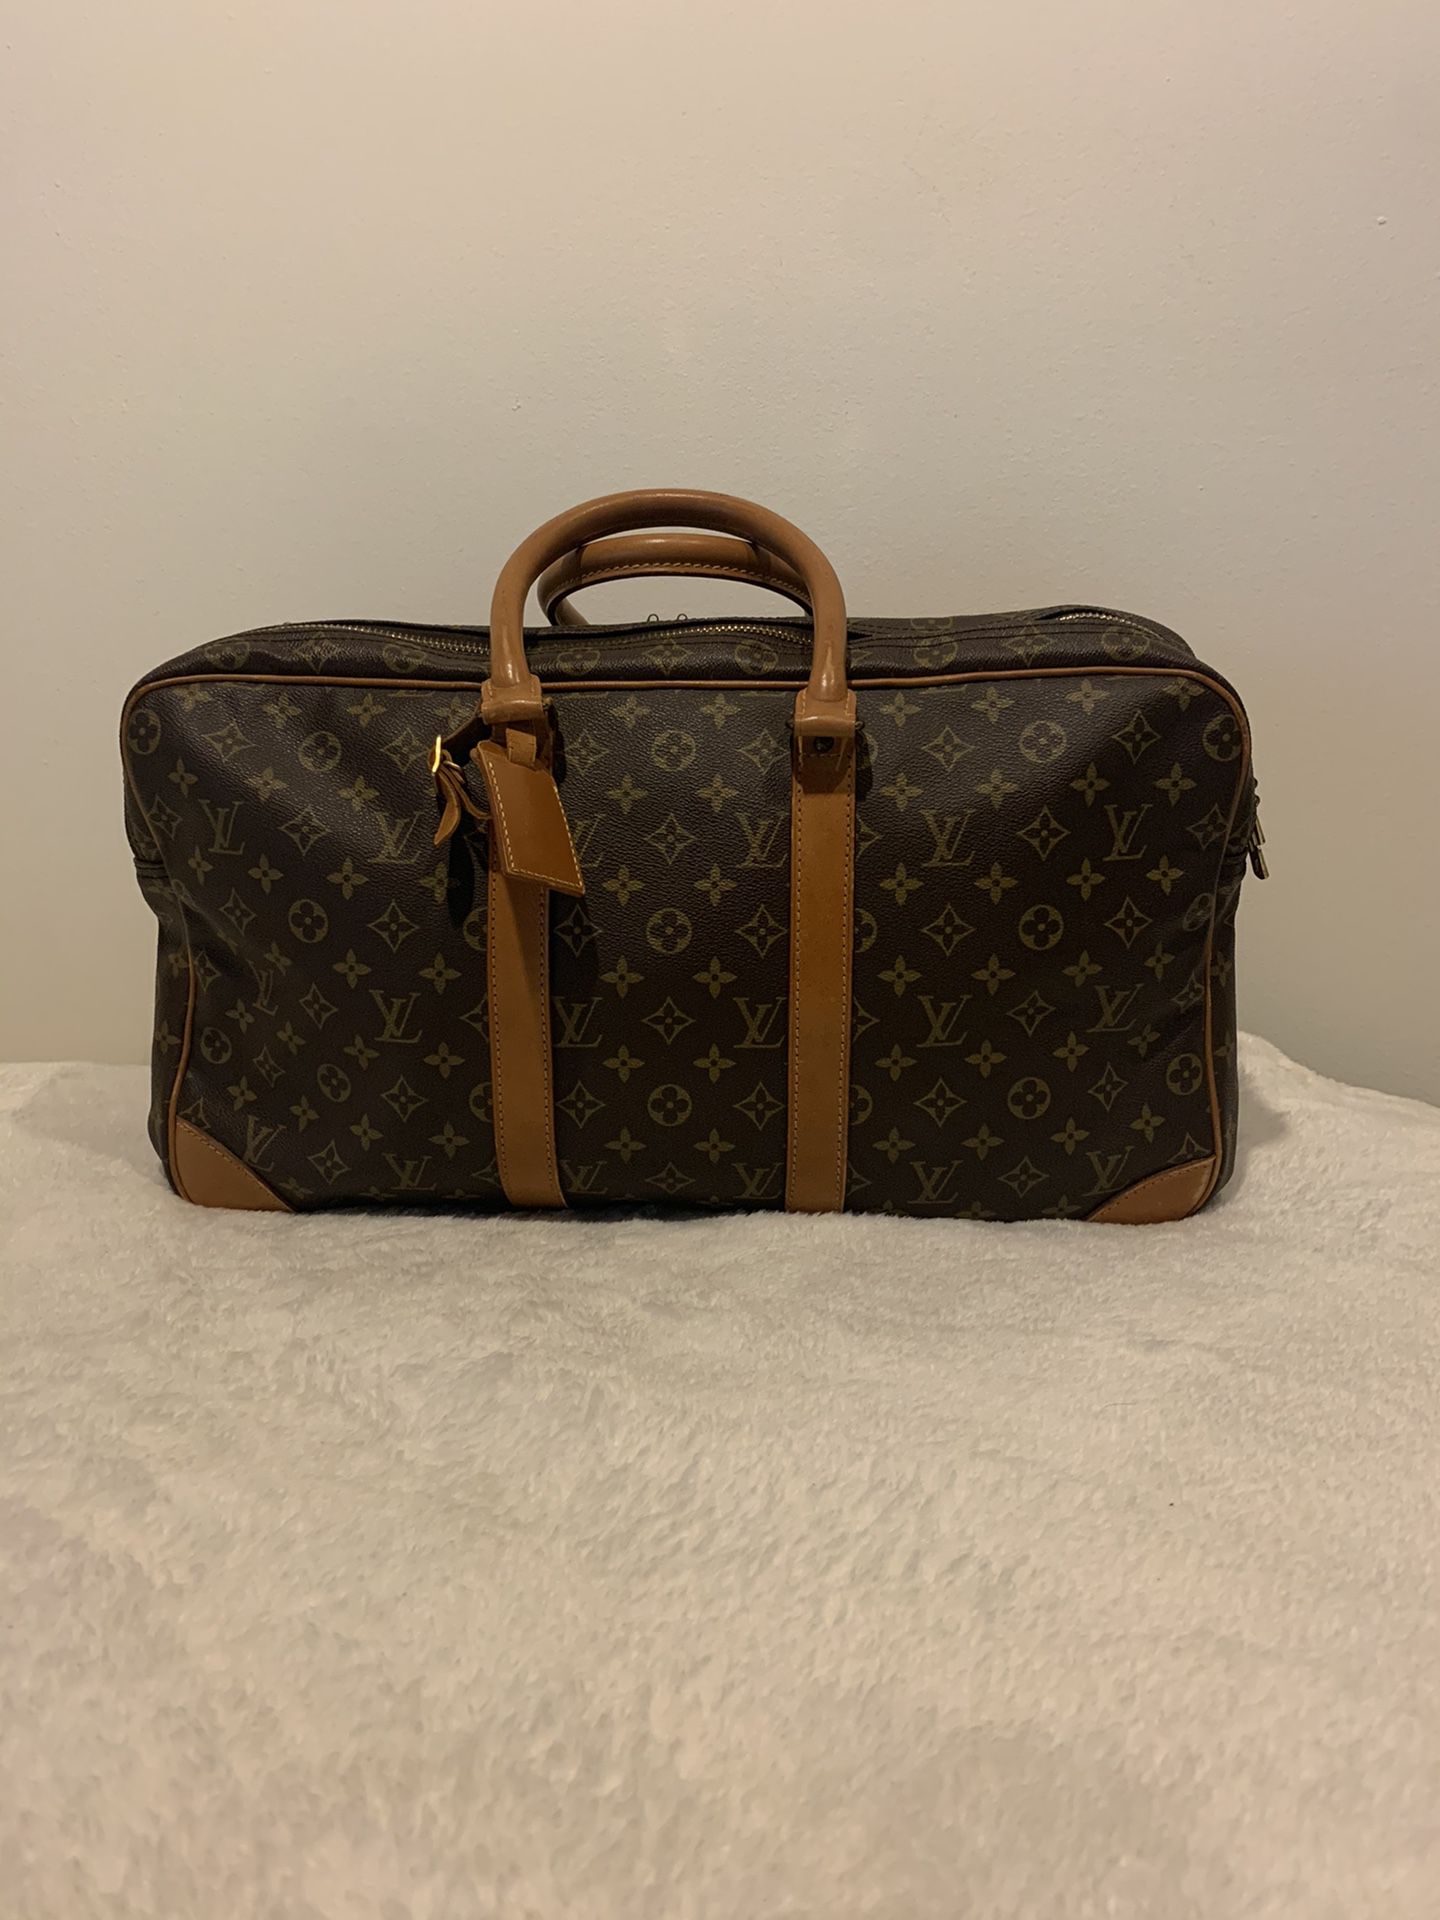 Authentic Louis Vuitton Three Section Duffle